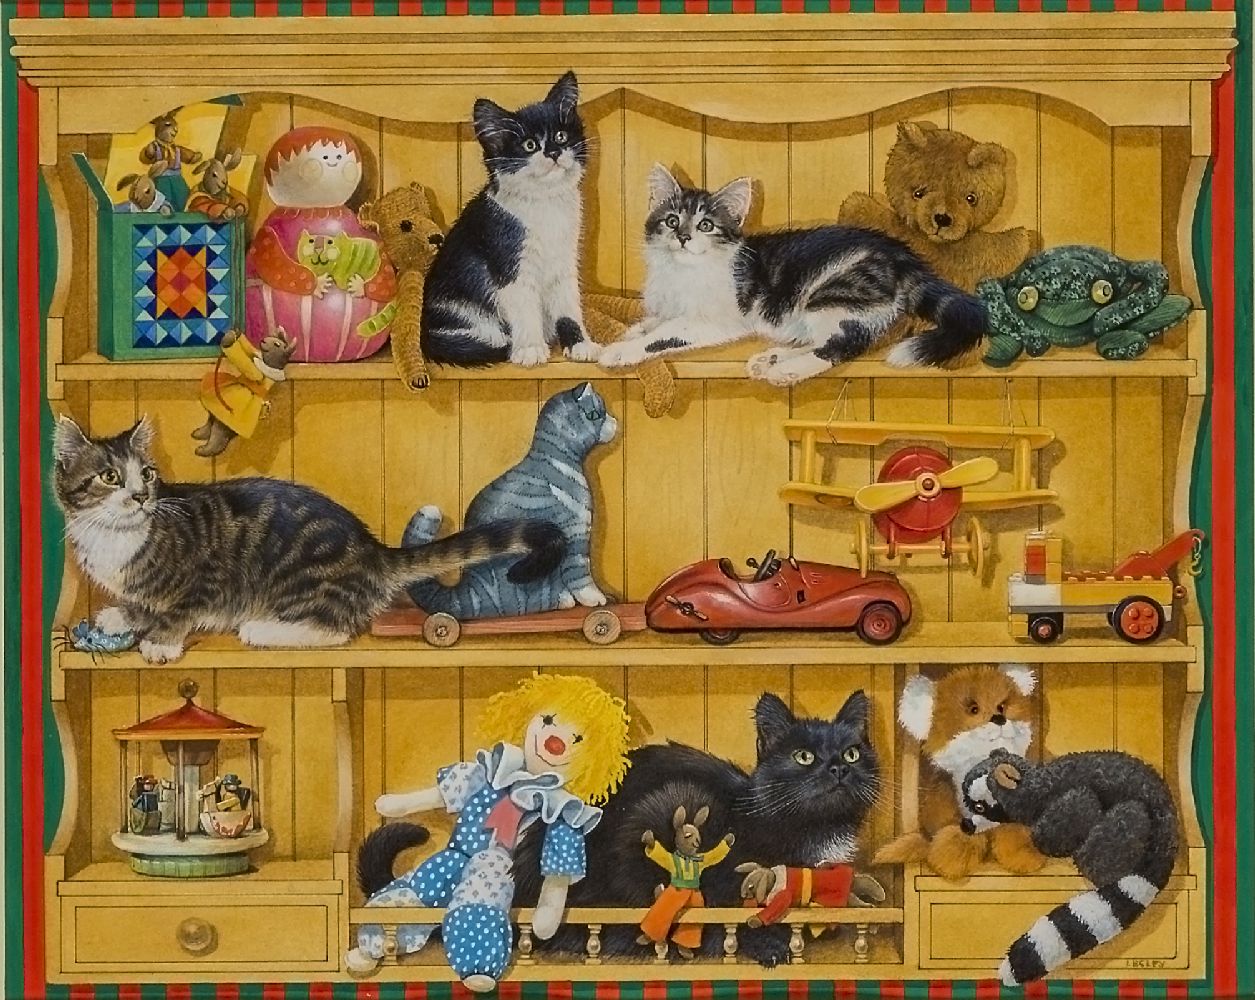 Lesley Anne Ivory, British b.1934 - Cat amongst the Toys; gouache on paper, signed lower right '